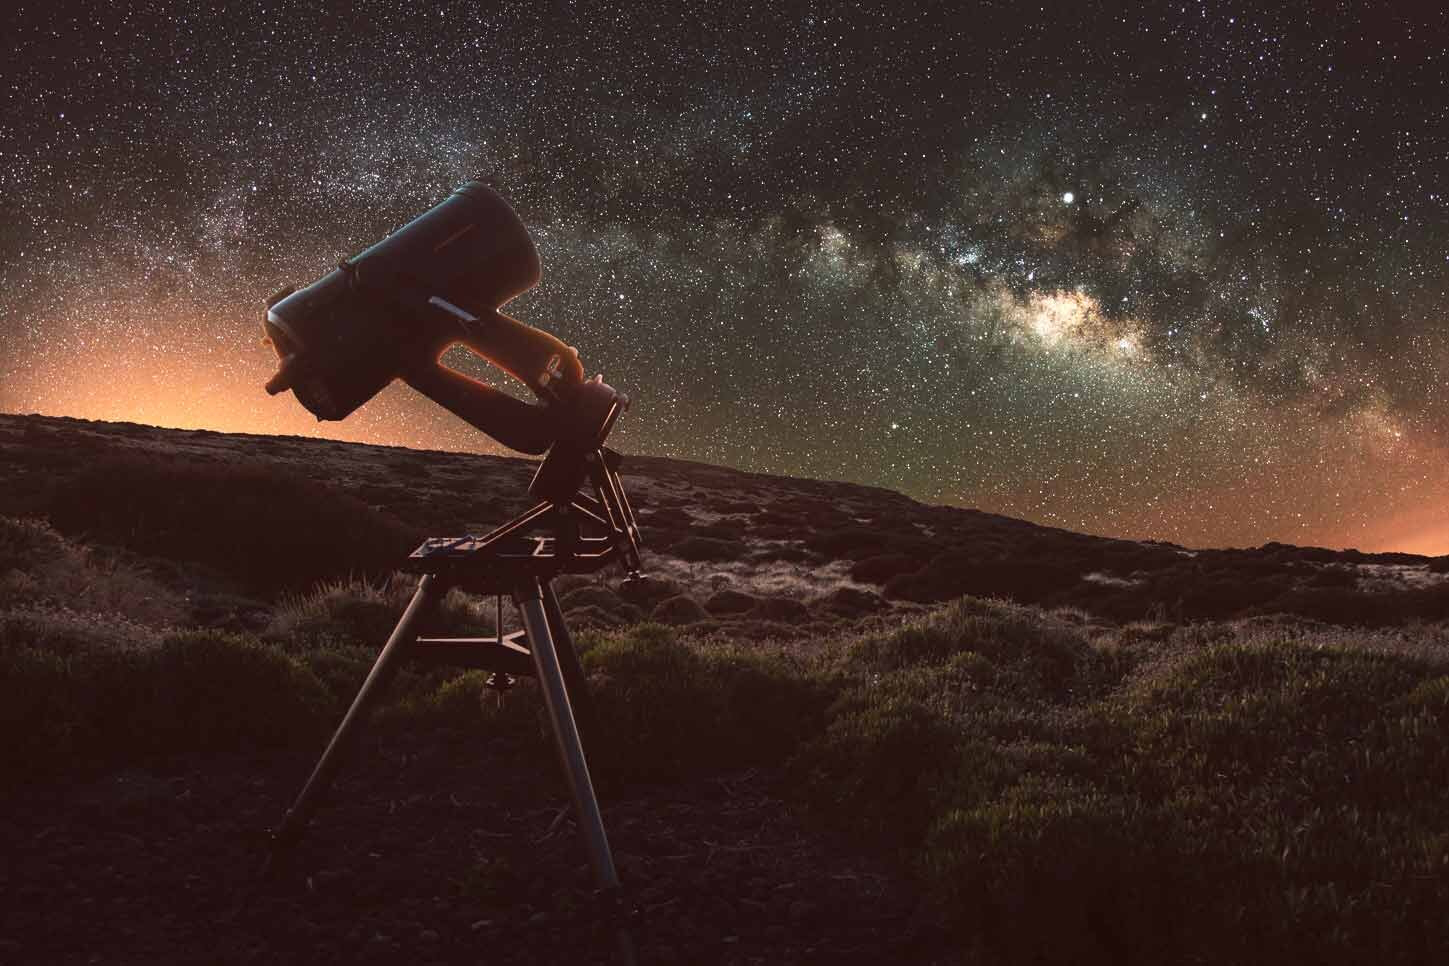 Tenerife is an excellent dark sky site offering star-studded views